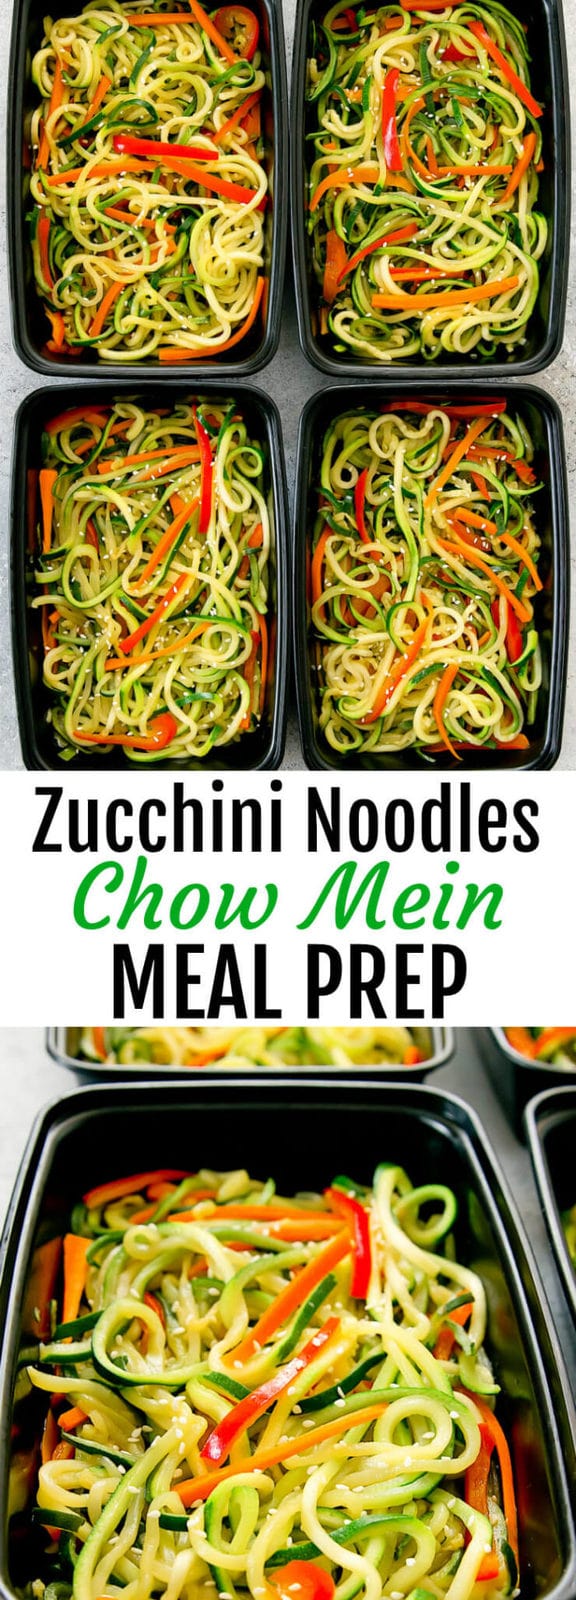 Zucchini Noodles Chow Mein Meal Prep